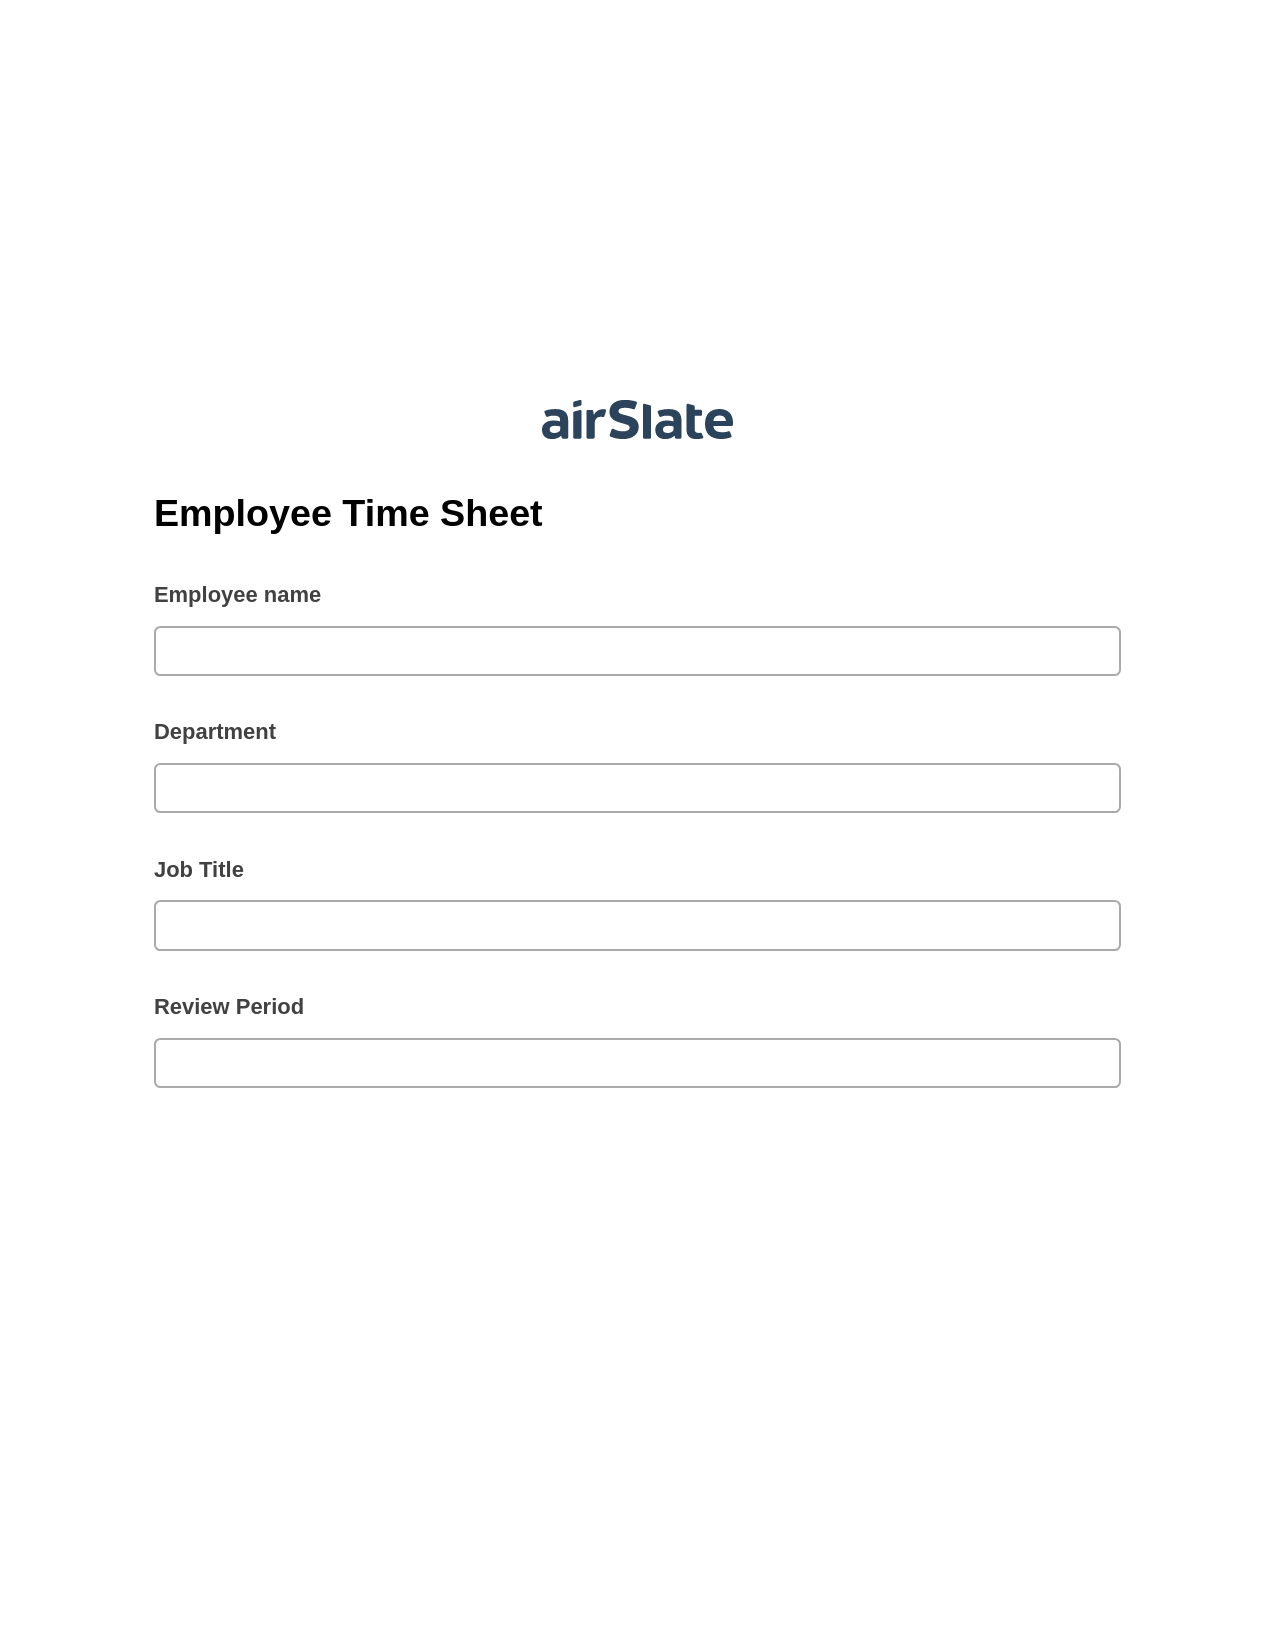 Multirole Employee Time Sheet Pre-fill Dropdowns from CSV file Bot, Create slate addon, Archive to Box Bot